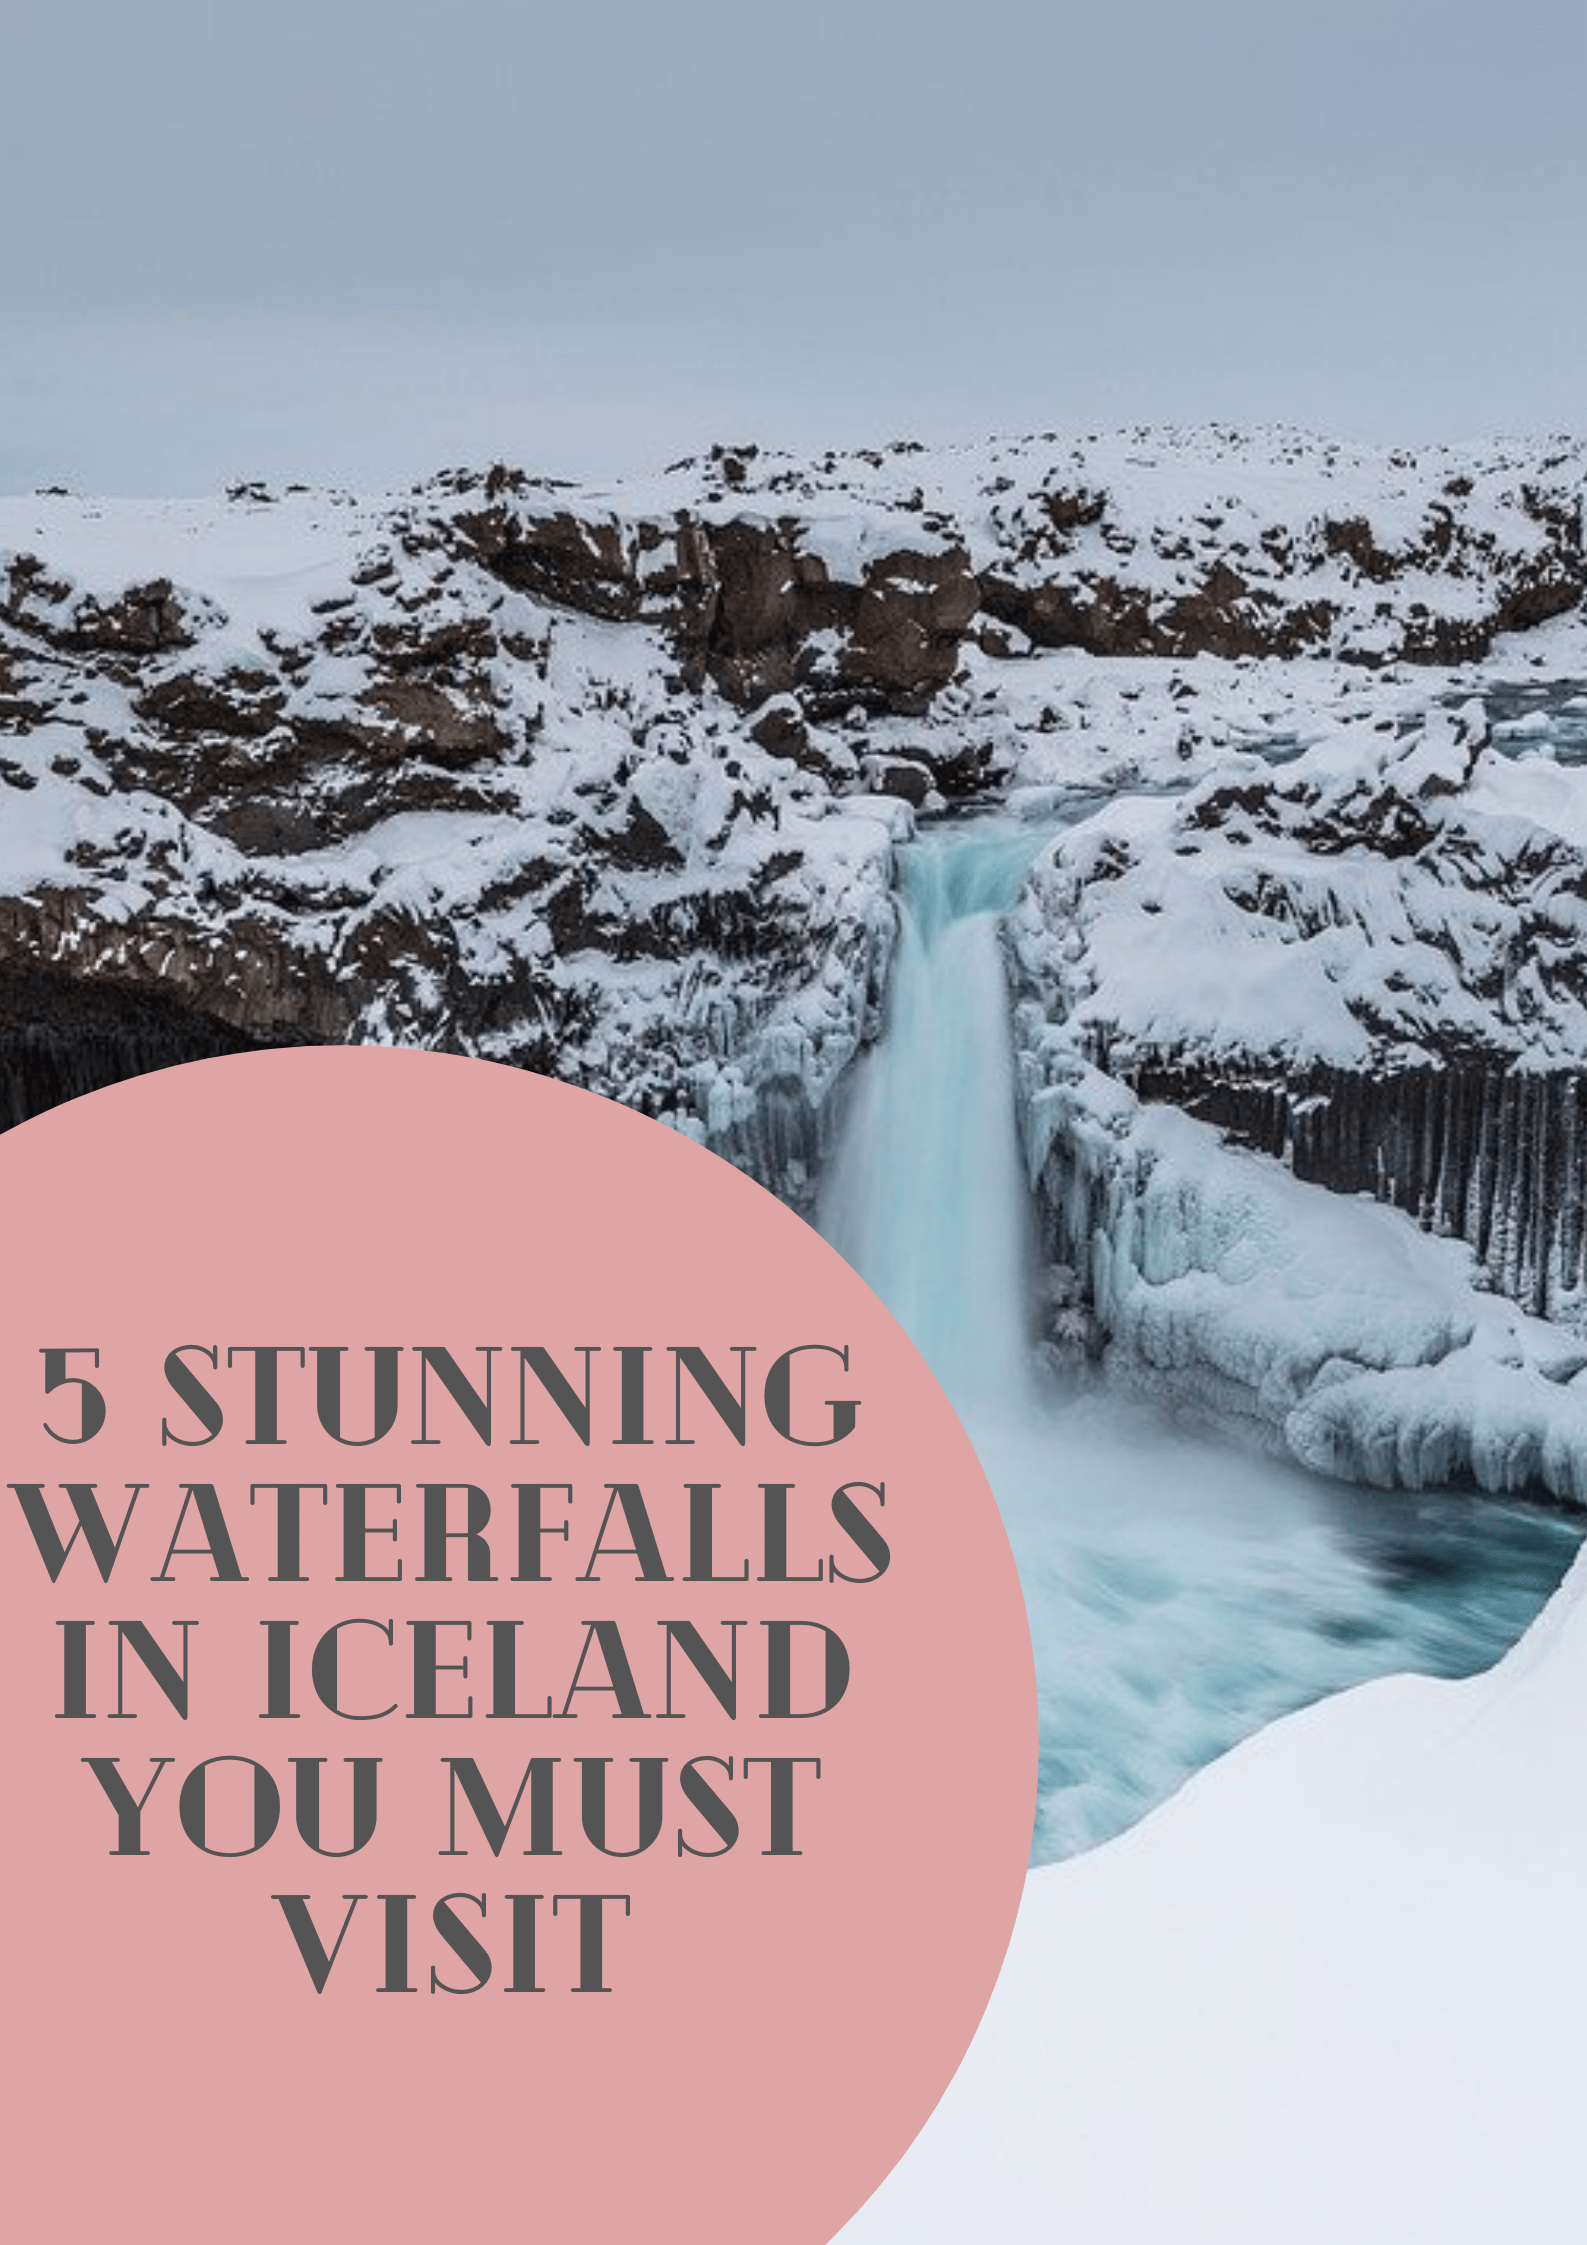 5 Stunning Waterfalls in Iceland You Must Visit